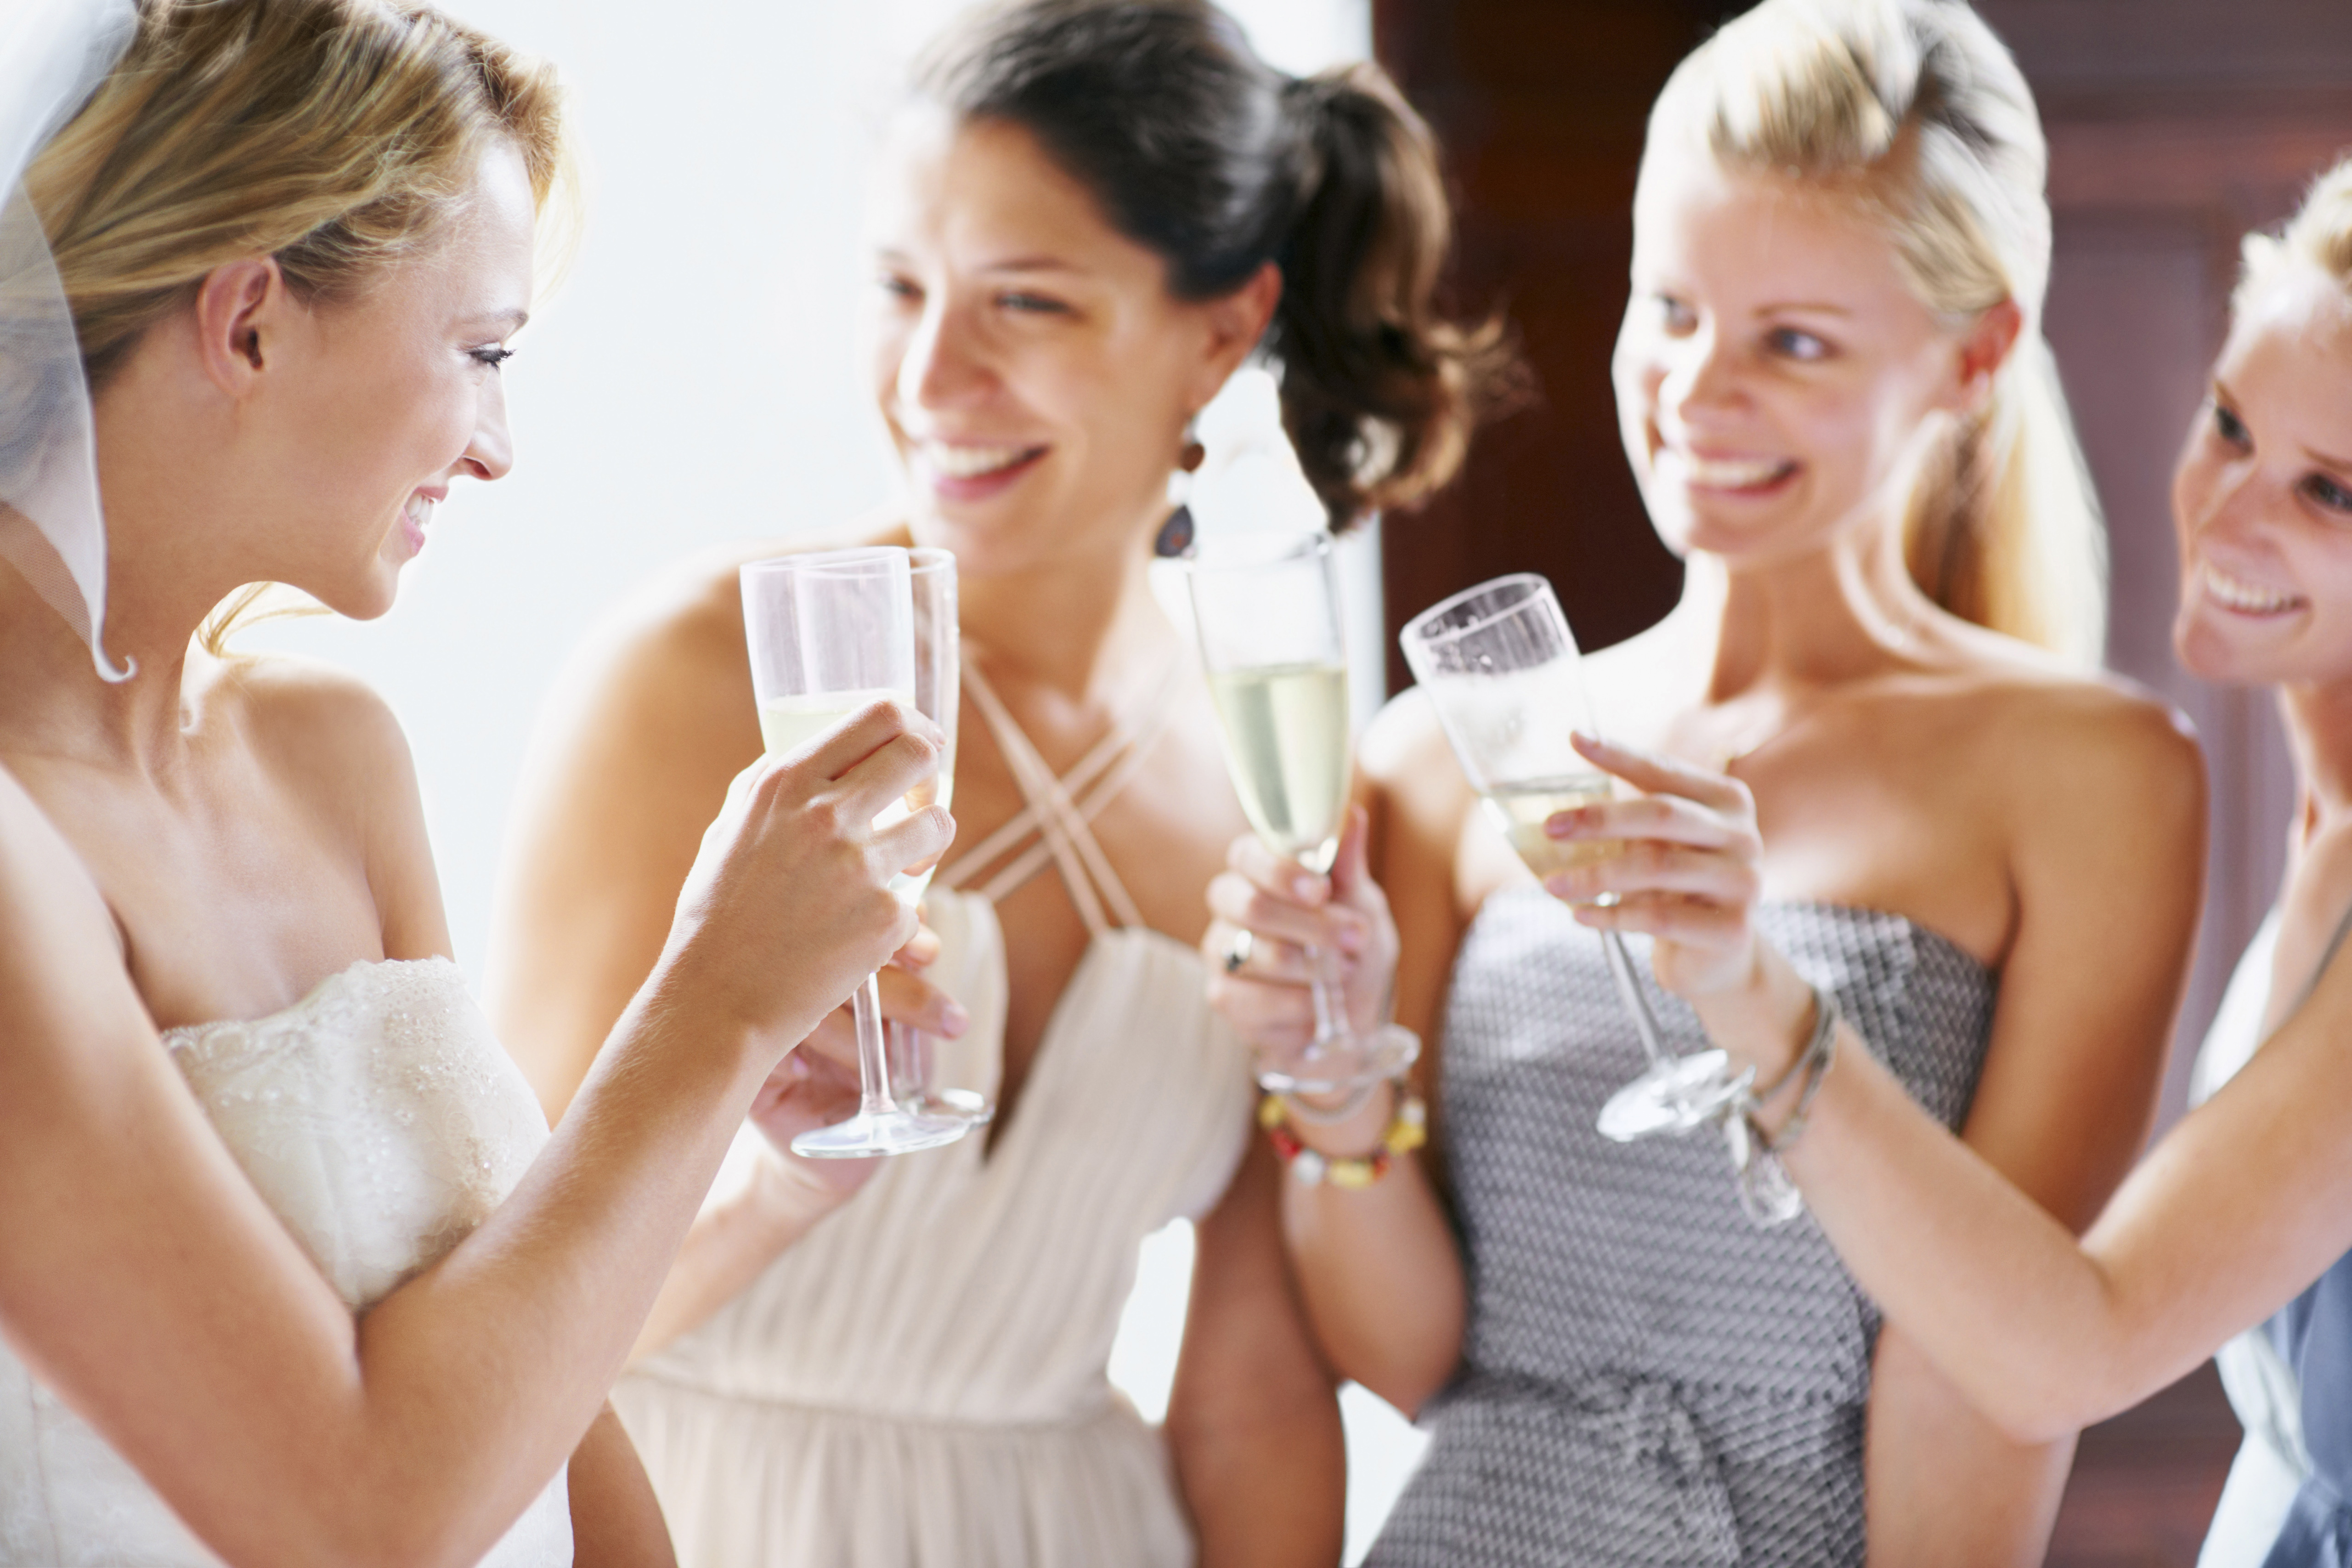 Bride and bridesmaids toasting. | Source: Getty Images